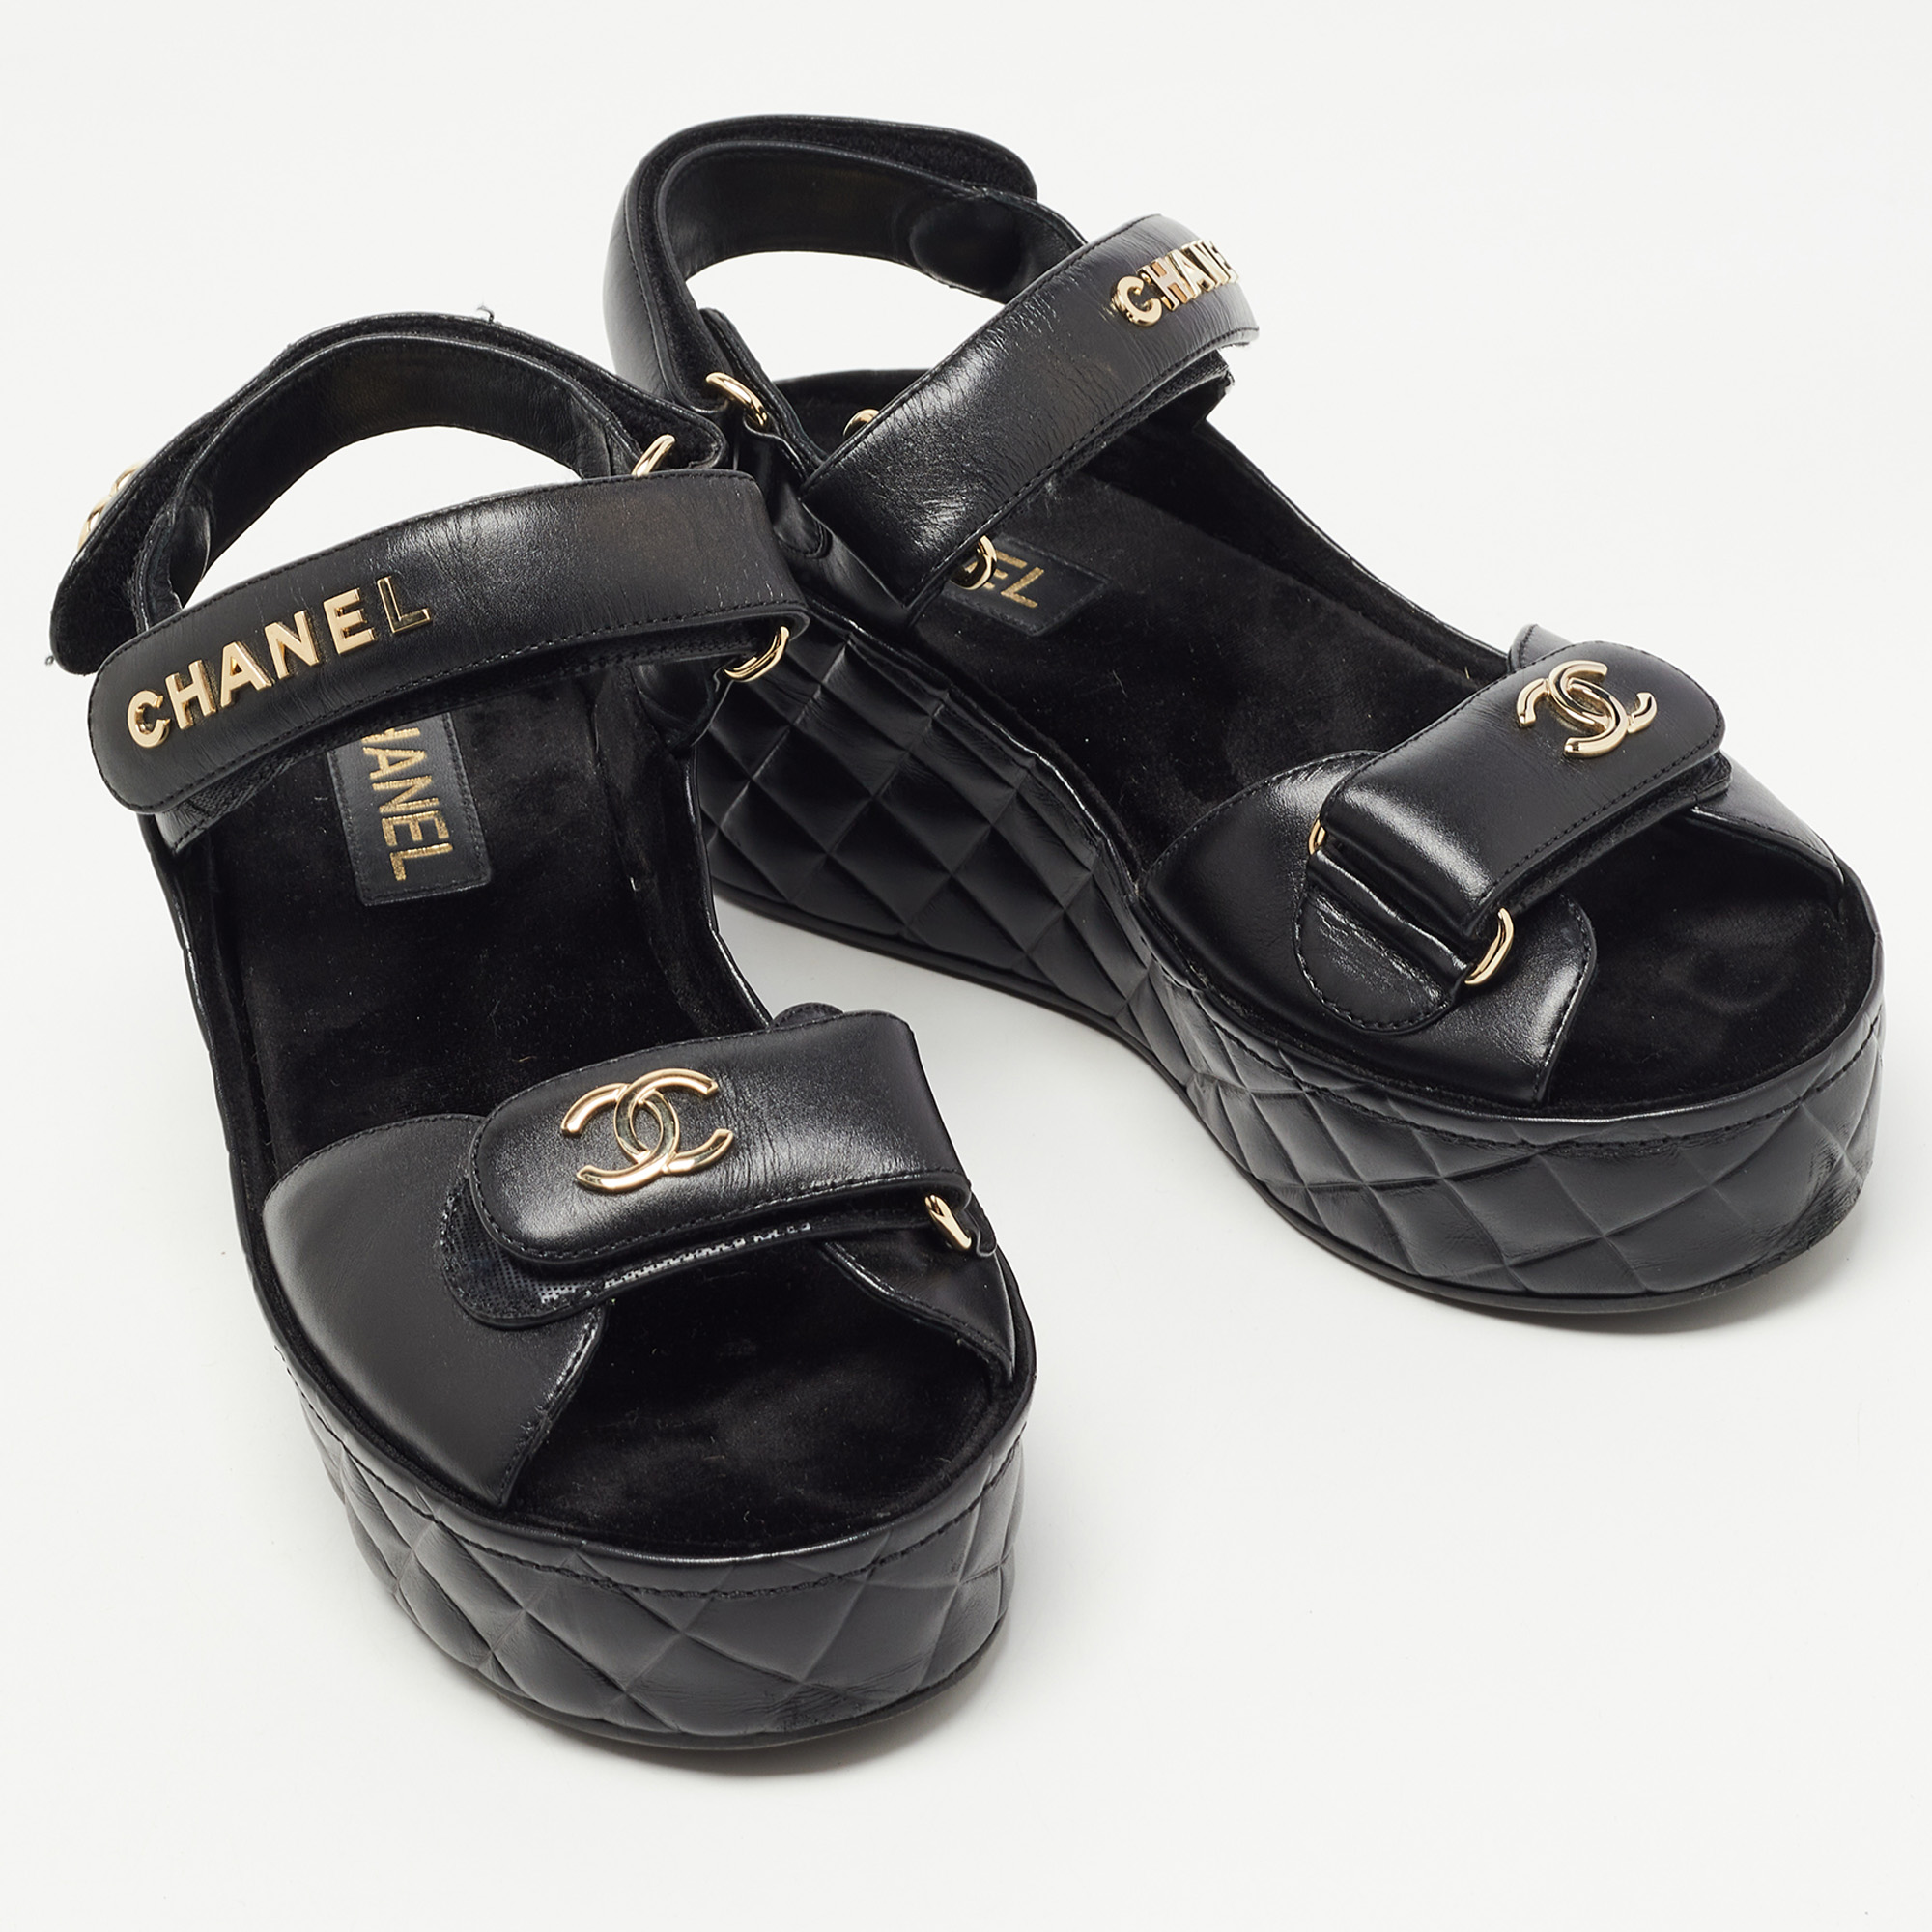 Chanel Runway Shoes - 20 For Sale on 1stDibs  chanel shoes 2014, chanel  boots 2014, chanel shoes 2015